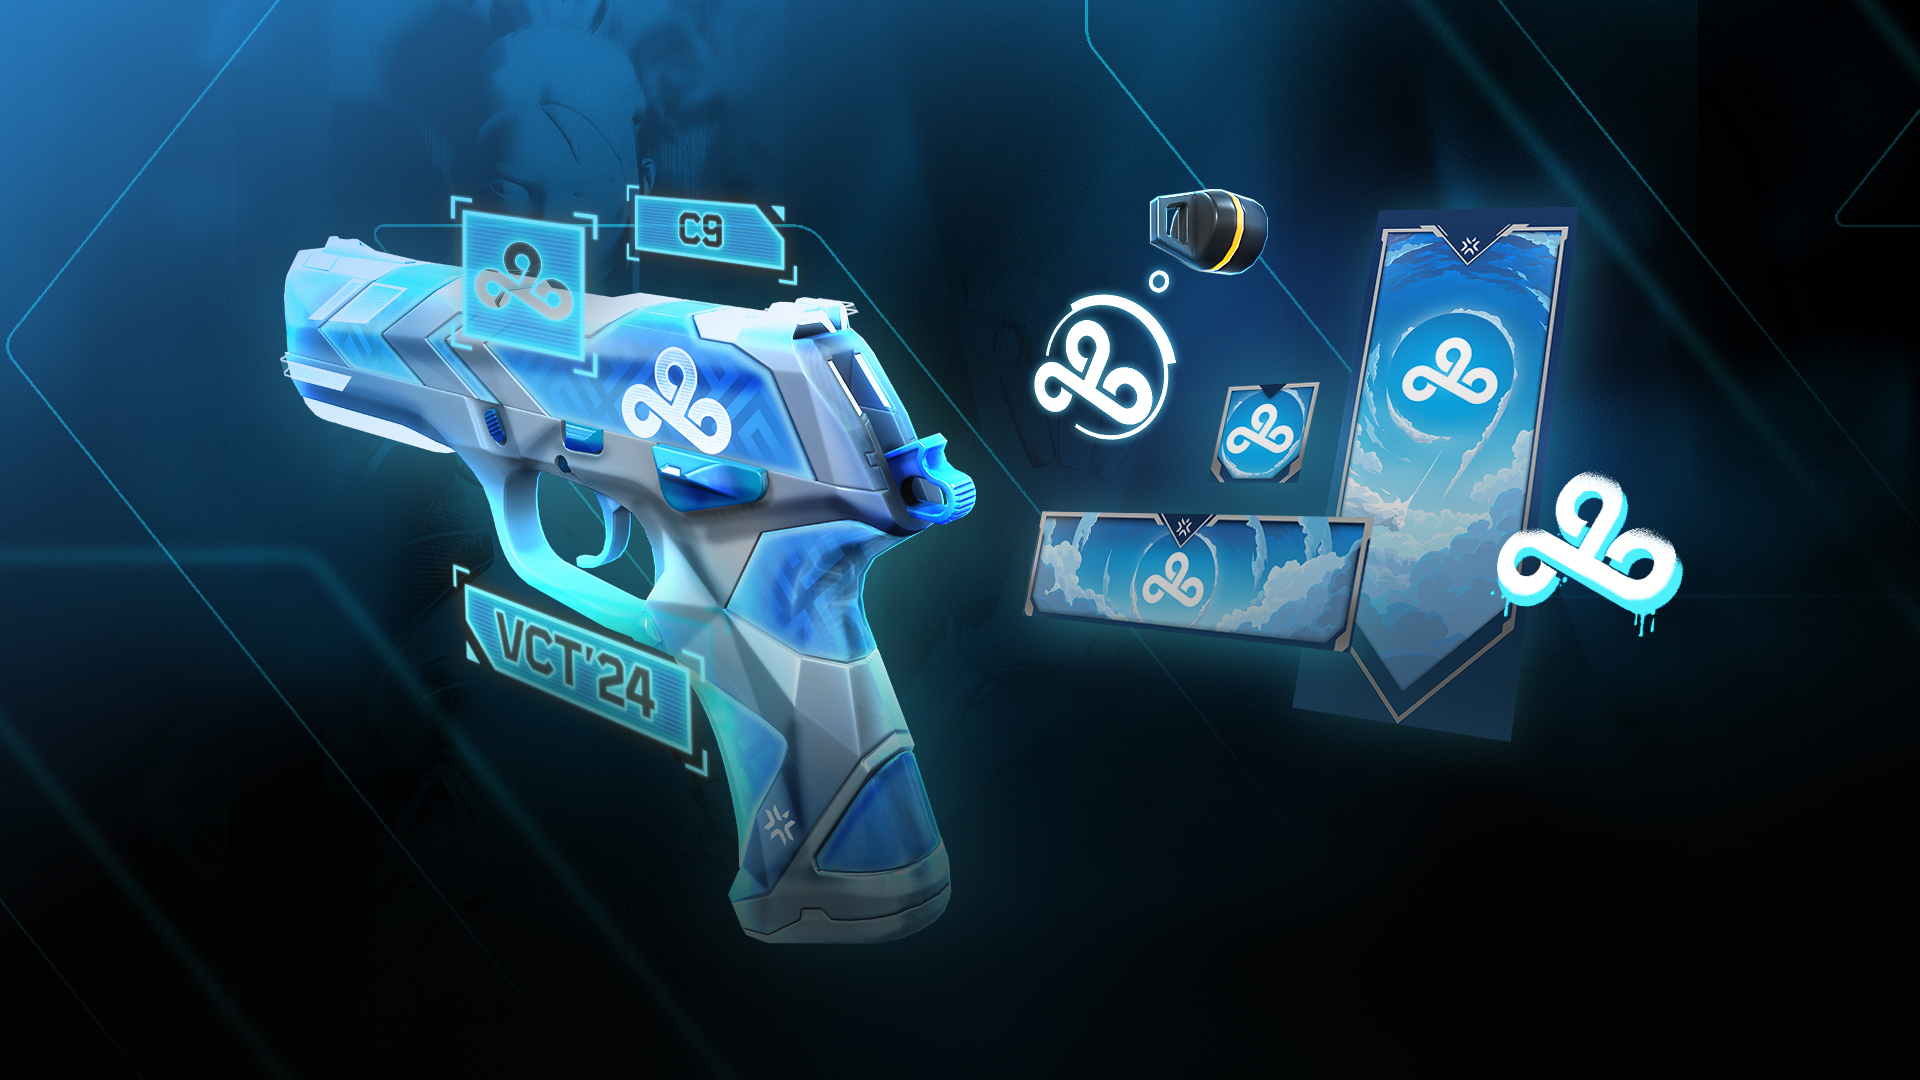 Cloud 9 VCT Team Capsule. (Image Credits: Riot Games)